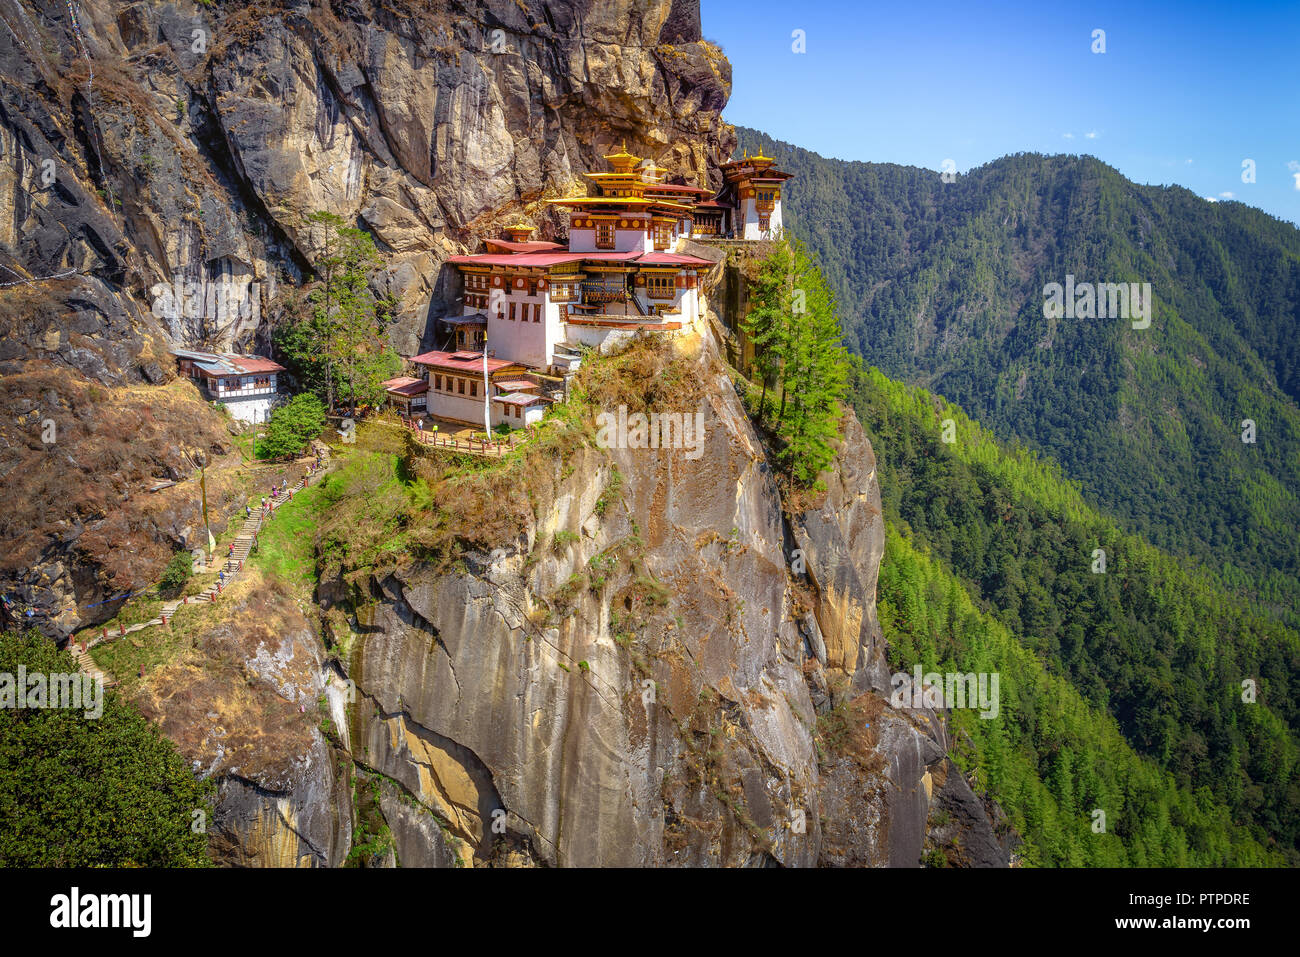 Tiger S Nest Monastery Paro Taktsang Located High On A Cliff In Paro